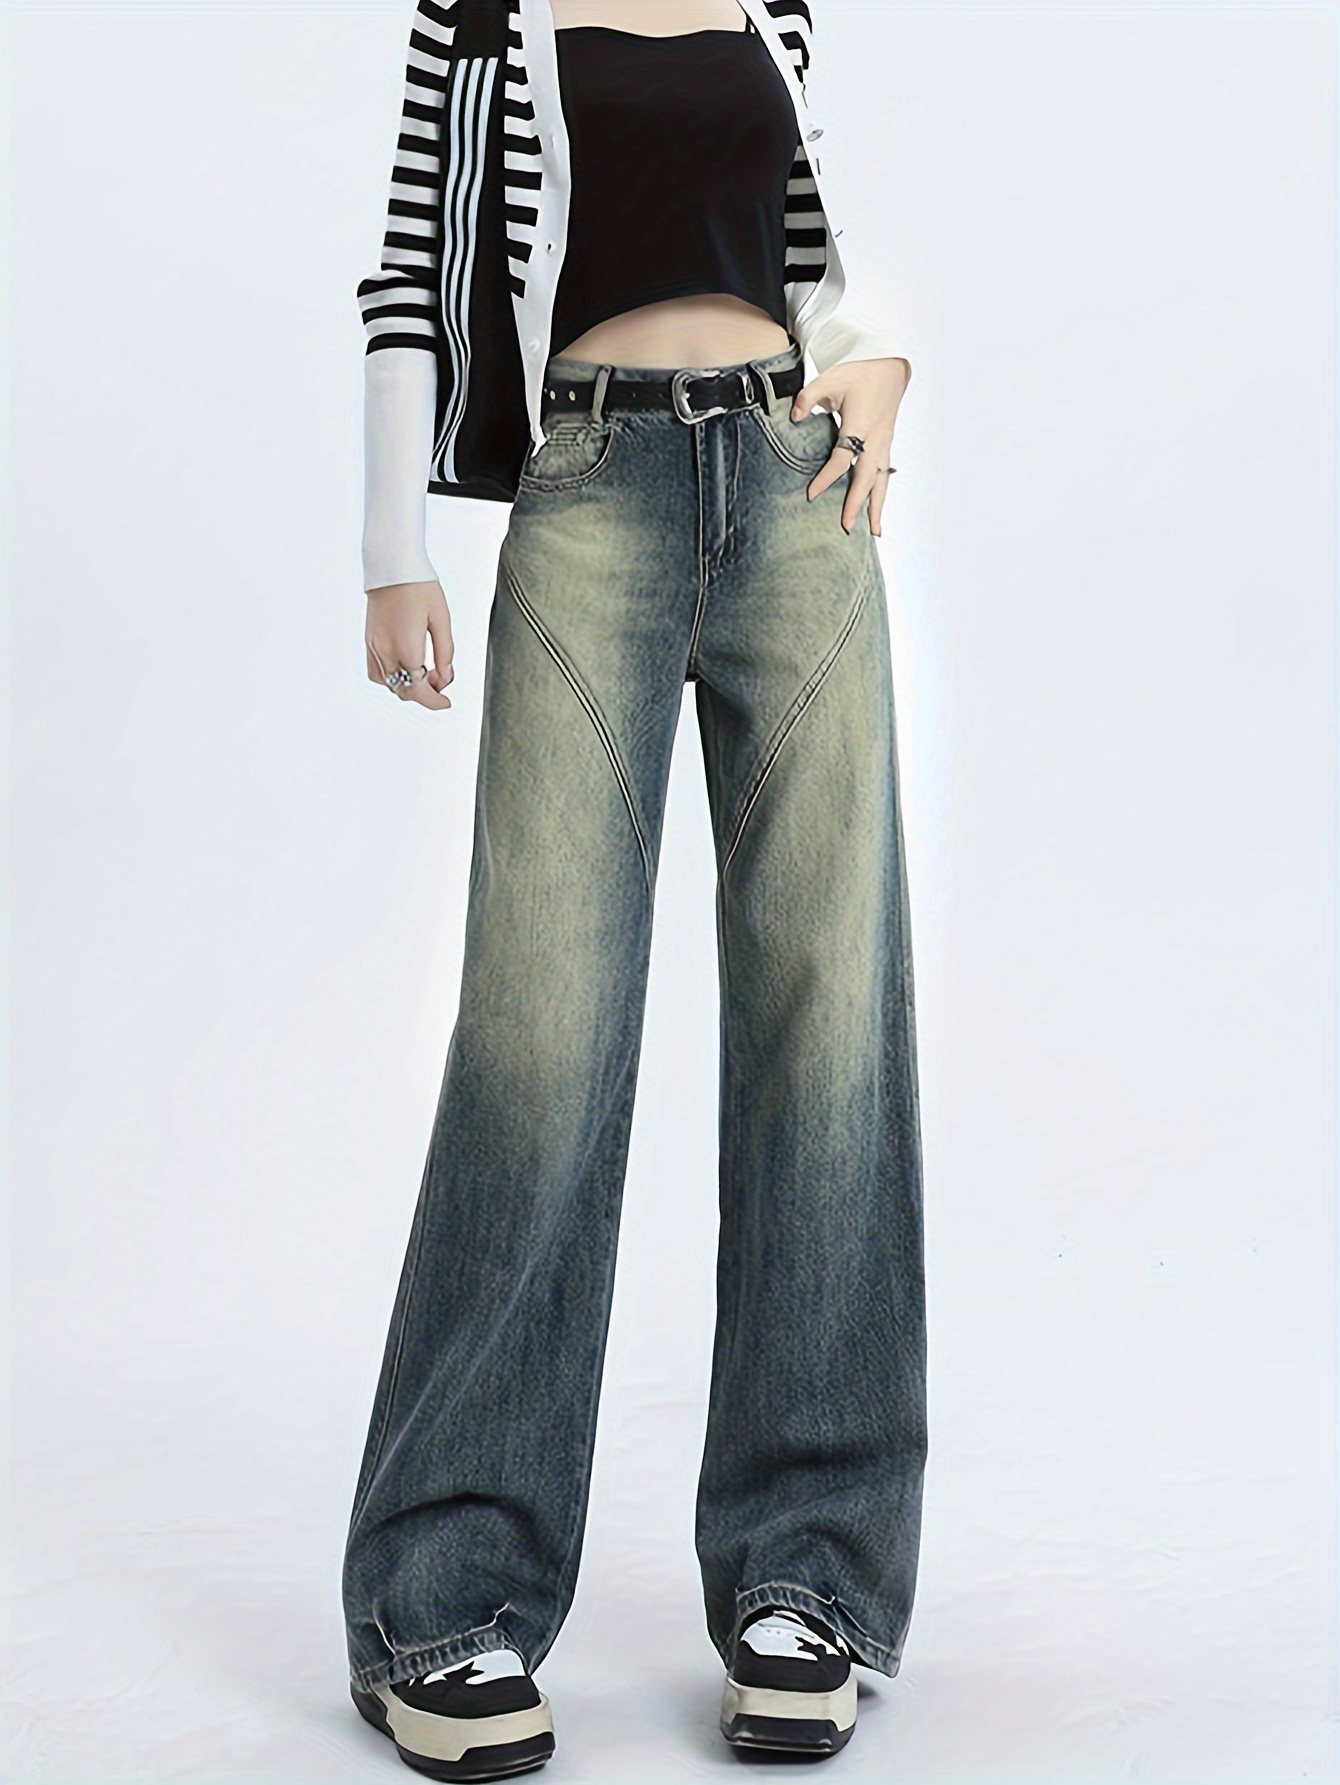 Vintage Cargo Pants Overalls Baggy Jeans, Women Casual Fashion Y2K Kpop  Vintage Style Streetwear, Big Pockets High Waist Straight Denim Trousers,  Wome